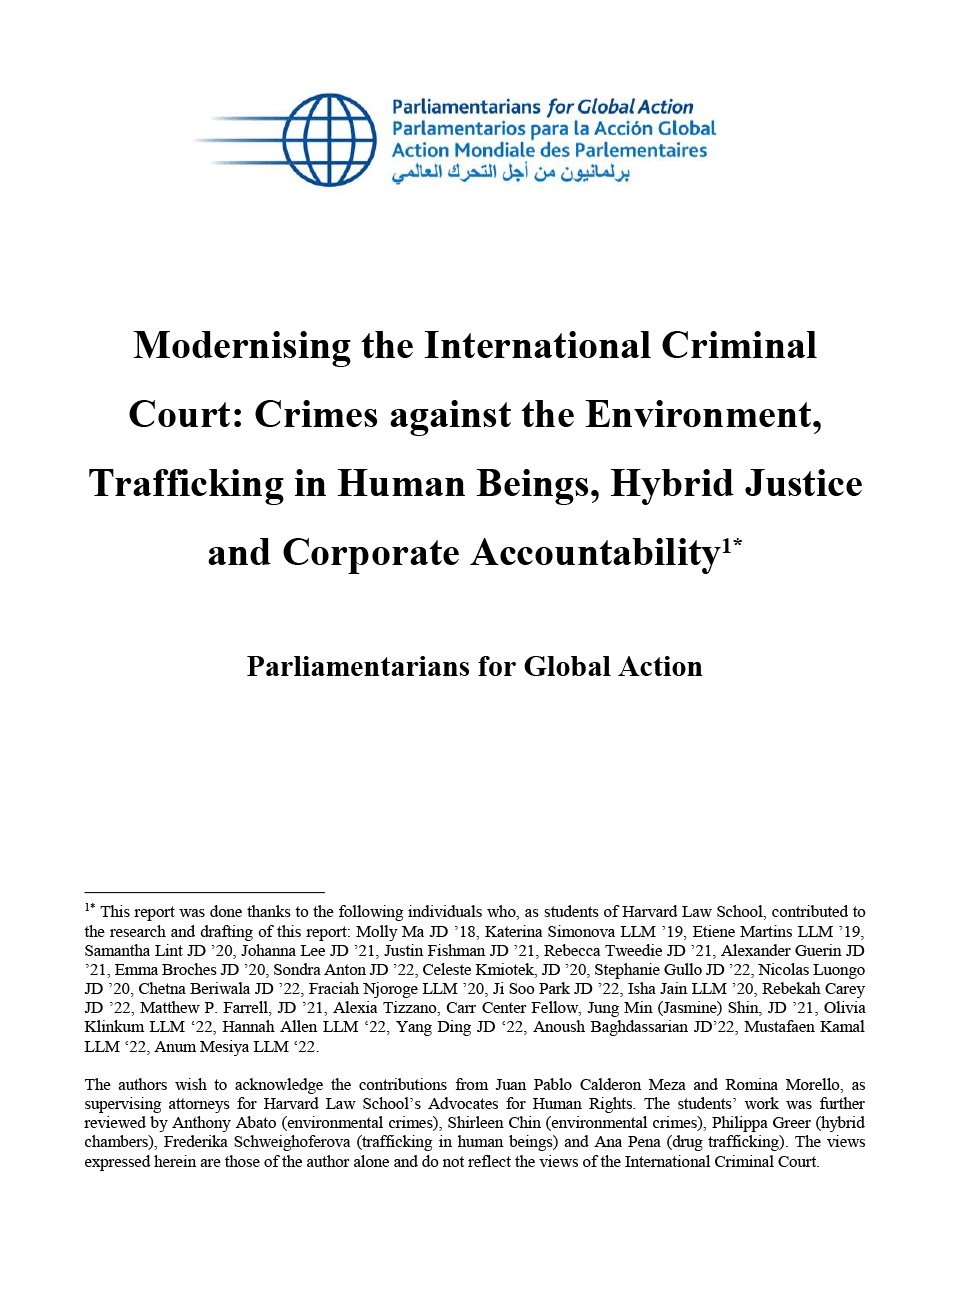 Modernising the International Criminal Court: Crimes against the Environment, Trafficking in Human Beings, Hybrid Justice and Corporate Accountability